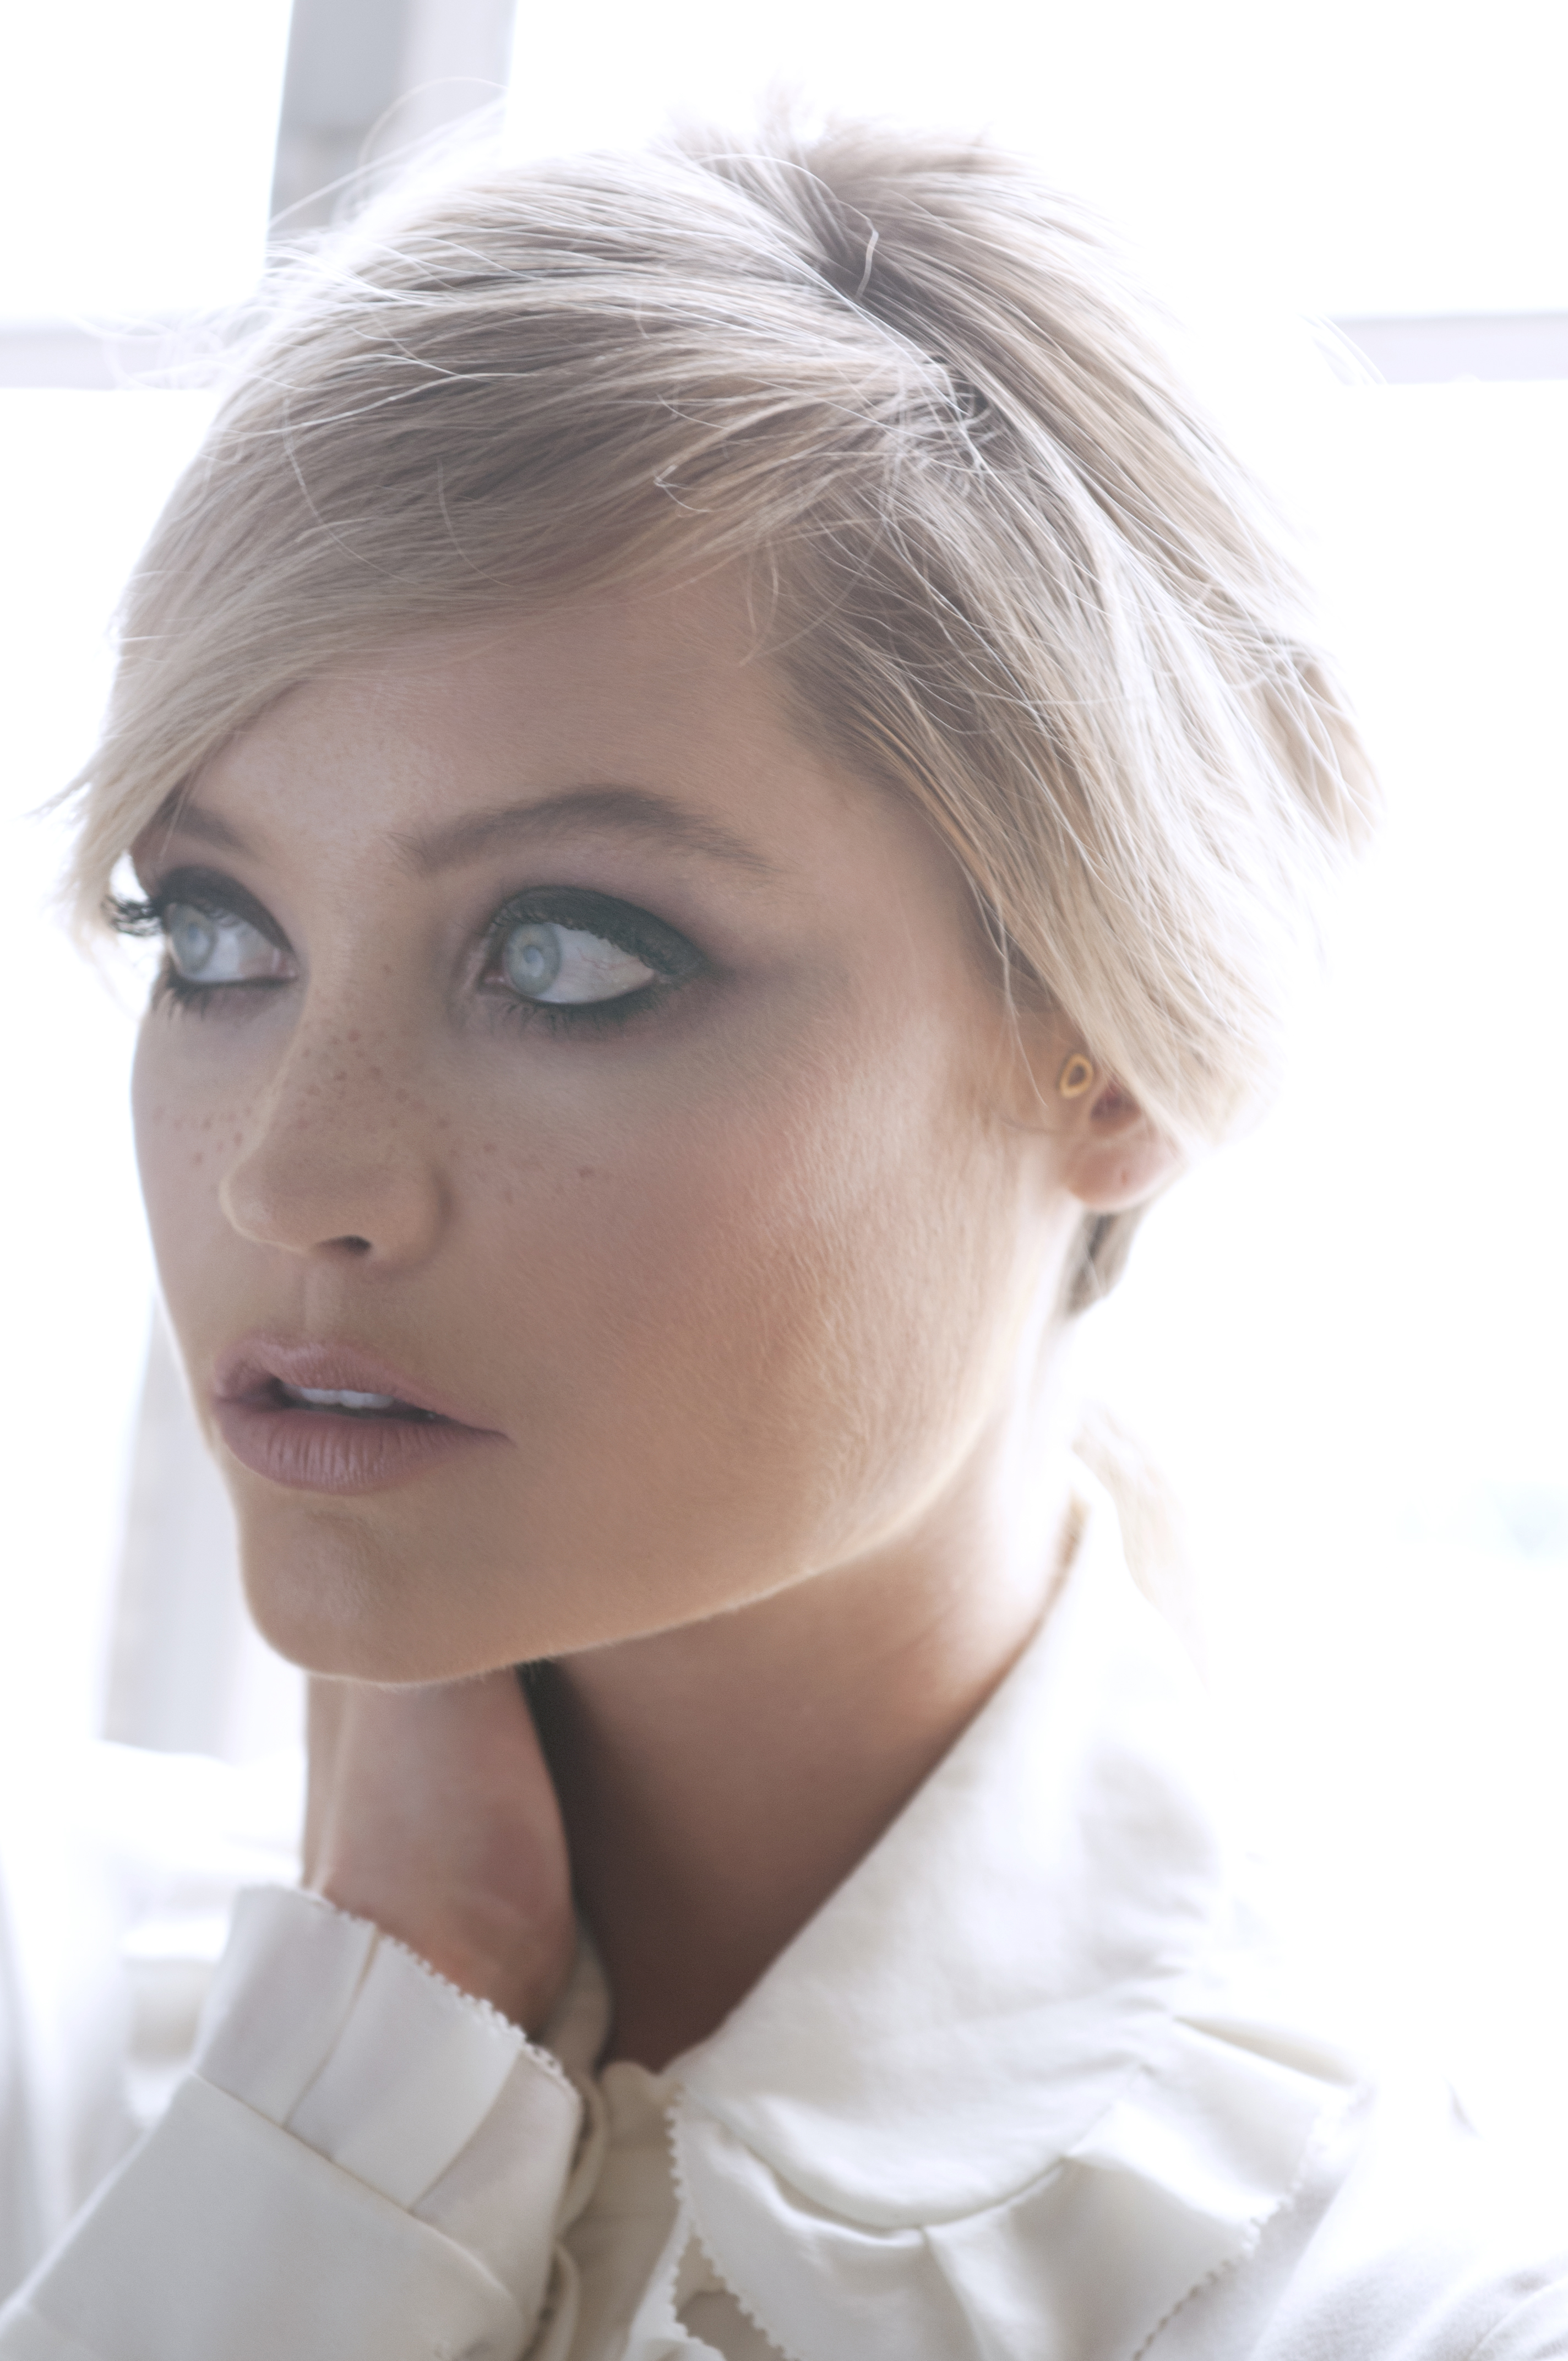 Laura Whitmore: The Truth Behind Social Media